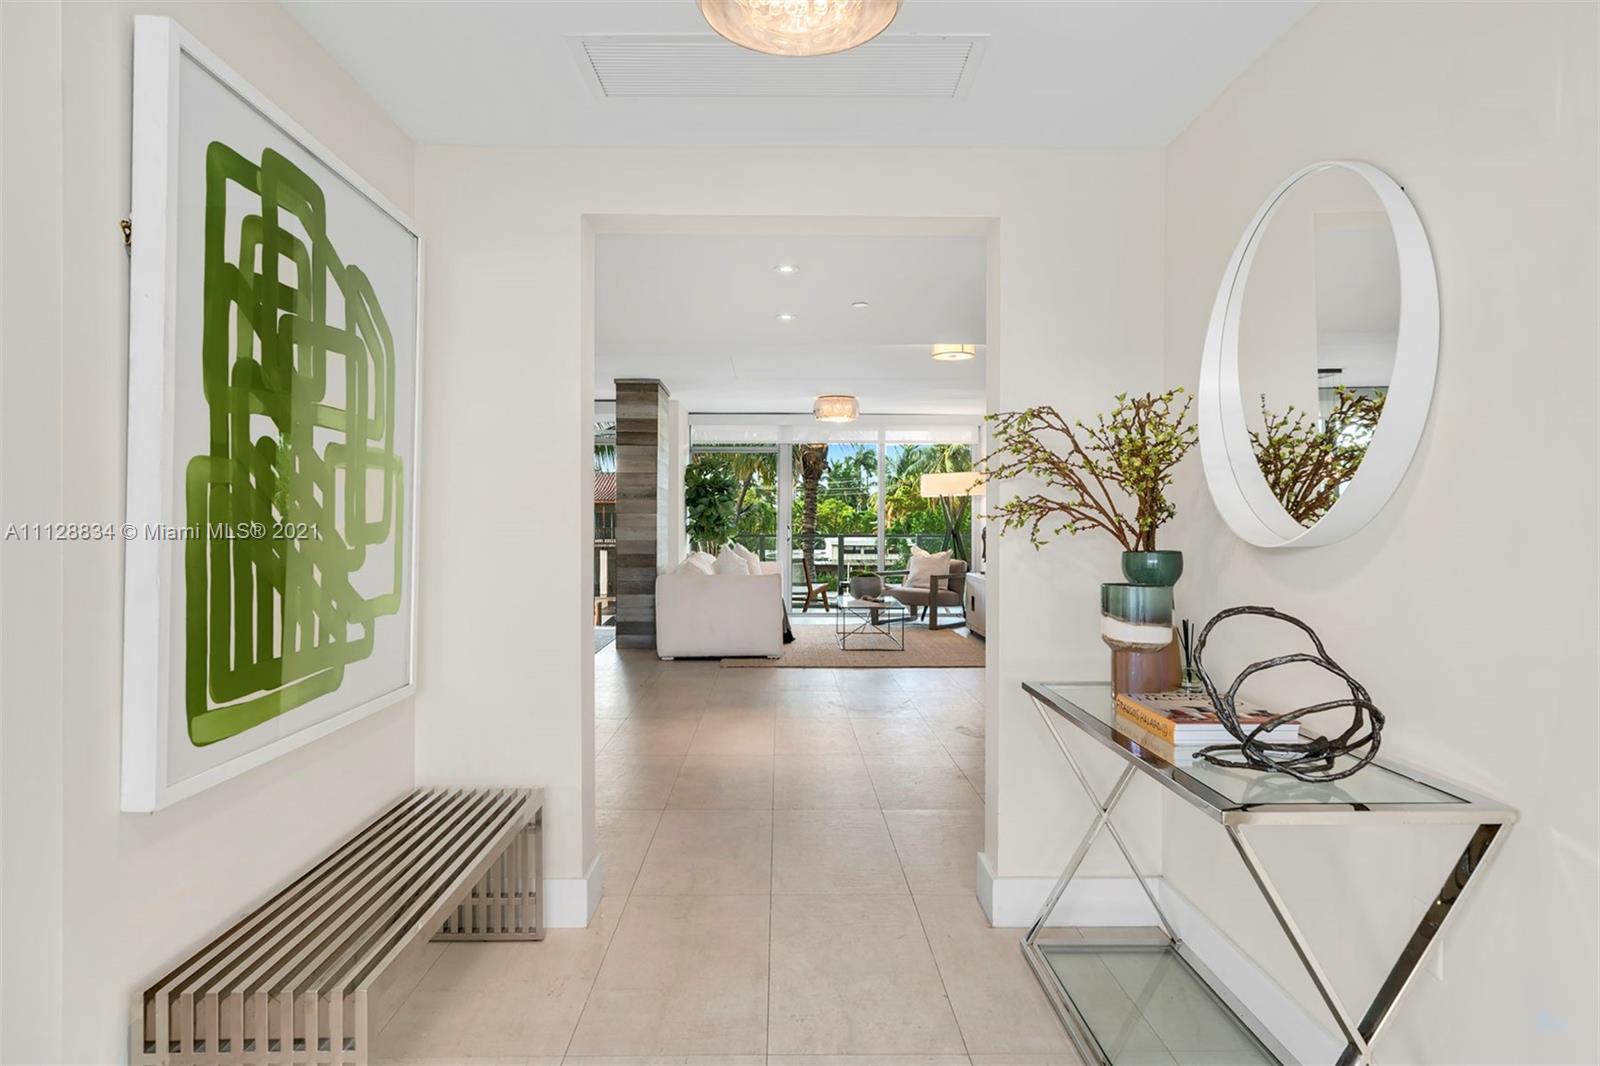 Fantastic opportunity to own a 3 BD/2.5 BA in a fully renovated boutique building in the Sunset Harbour neighborhood! Enjoy 1,728 SF of interior space with two spacious balconies and water views overlooking sunset islands. Double door entry from the open-air, Raymond Jungles designed courtyard. Open floor plan with an amazing kitchen with Miele appliances and an induction oven. The primary bedroom features direct water views, a spacious walk-in closet, and a beautiful master bathroom with a shower & bathtub.Enjoy cosmopolitan living with luxury amenities including a rooftop pool overlooking the Miami skyline, top of the line gym, concierge, 2 valet spaces, a boardwalk along the water & steps away from your favorite spots:Fresh Market,Trader Joes, Barry's,Anatomy,& minutes to Lincoln road.